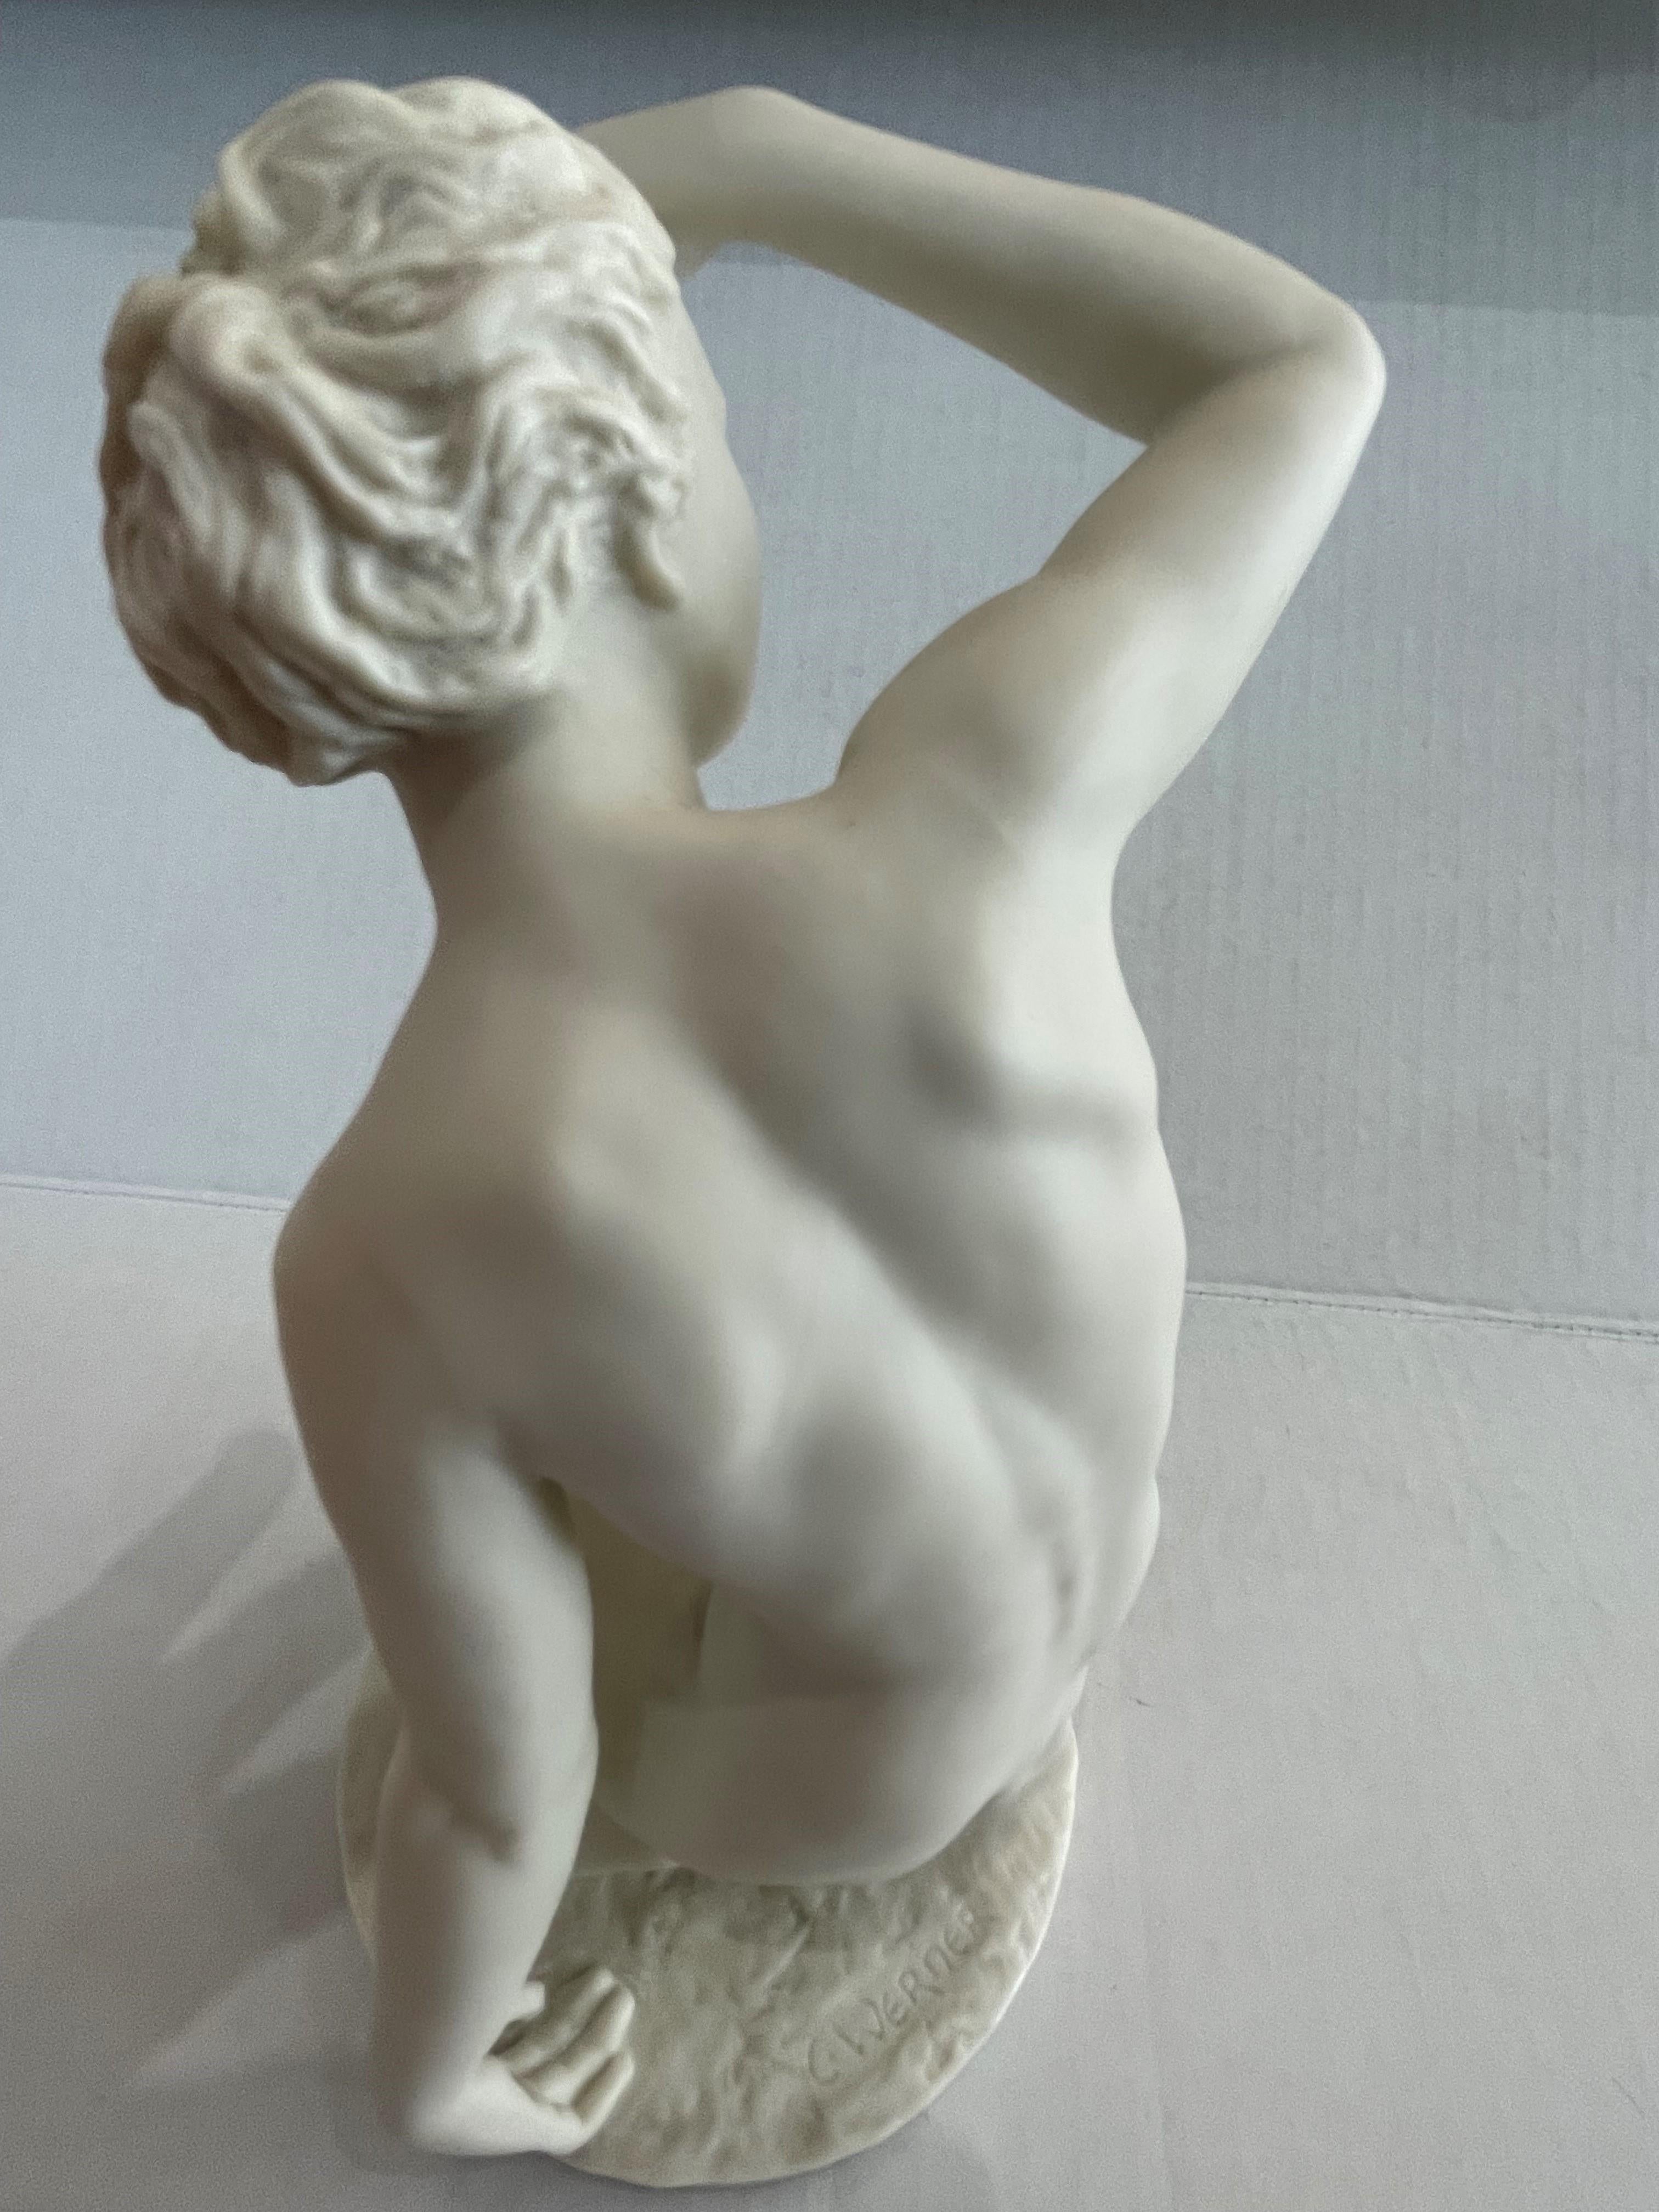 20th Century Bisque Figure of a Female Nude by Lorenz Hutschenreutner For Sale